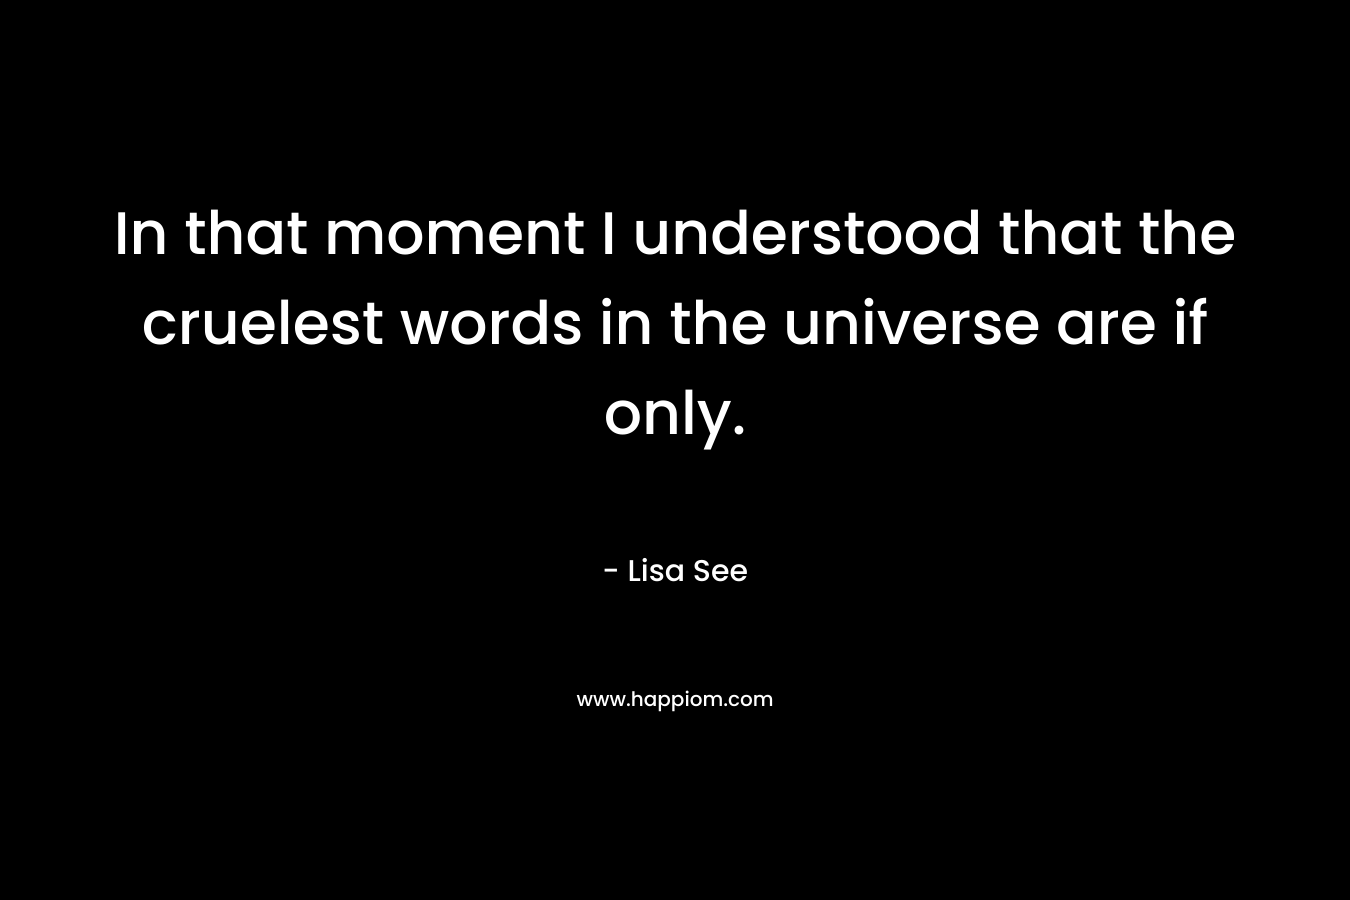 In that moment I understood that the cruelest words in the universe are if only.